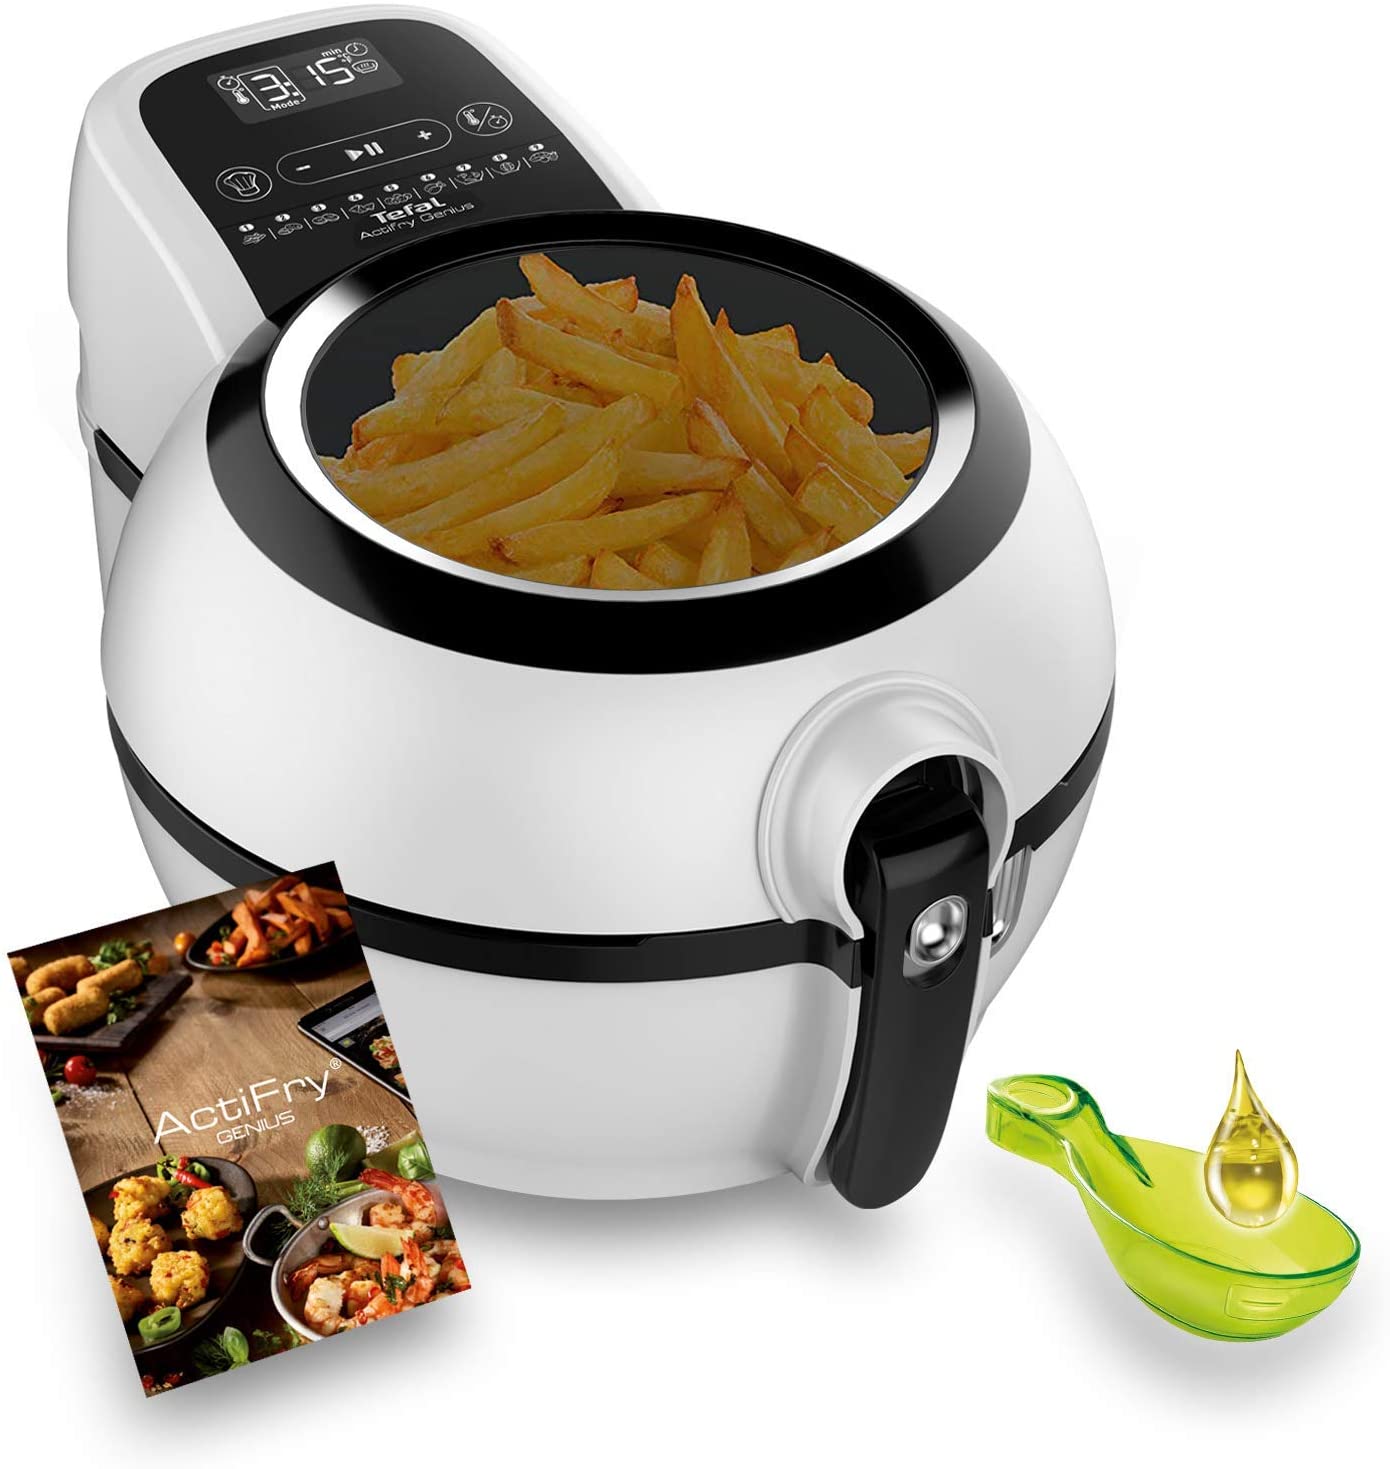 Tefal Actifry Genius Snaking FZ761015 Oil Fryer, 1.2 kg, with 9 Automatic Programmes and Snack Accessories, Intuitive Touch Panel and Recipe, Dishwasher Safe, Black